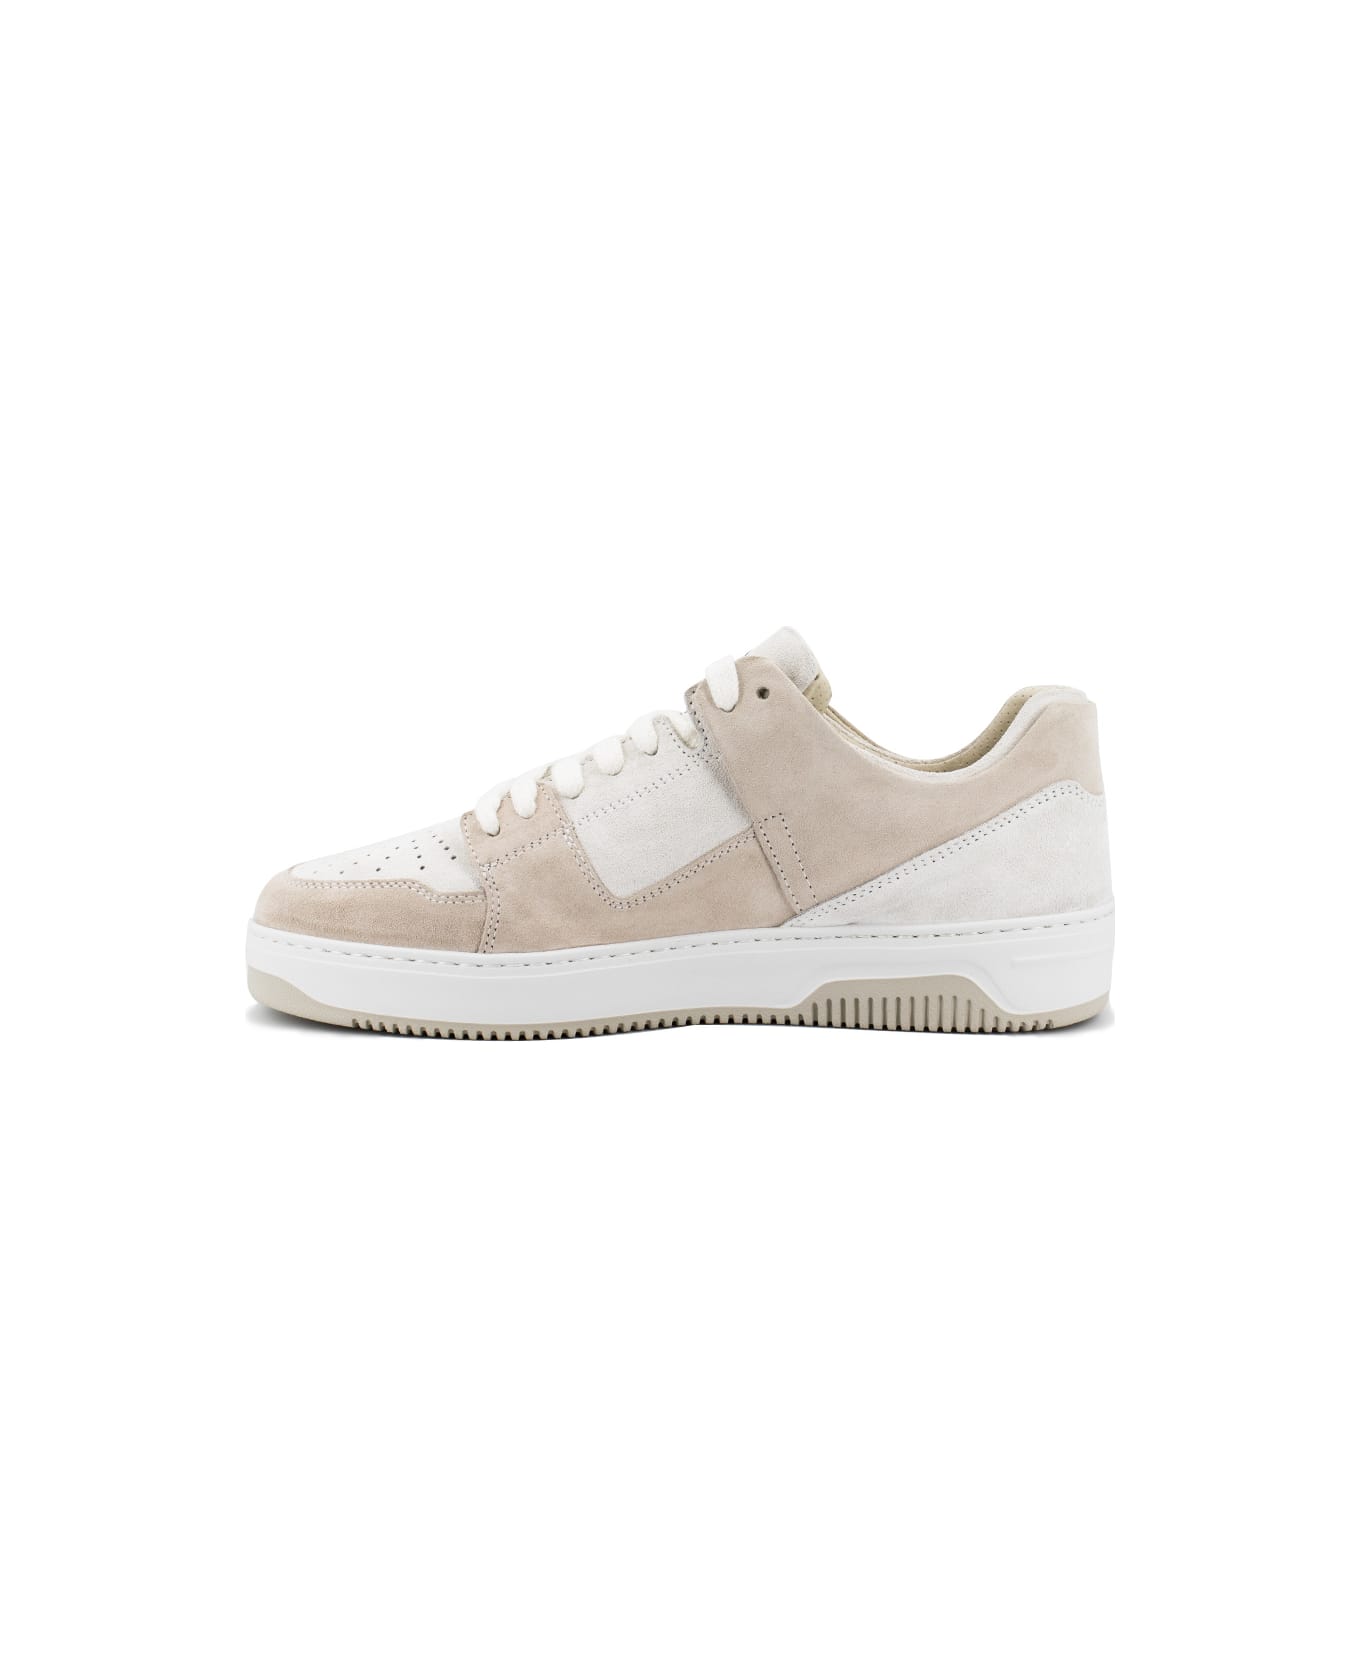 Eleventy Sneakers - SAND AND WHITE スニーカー